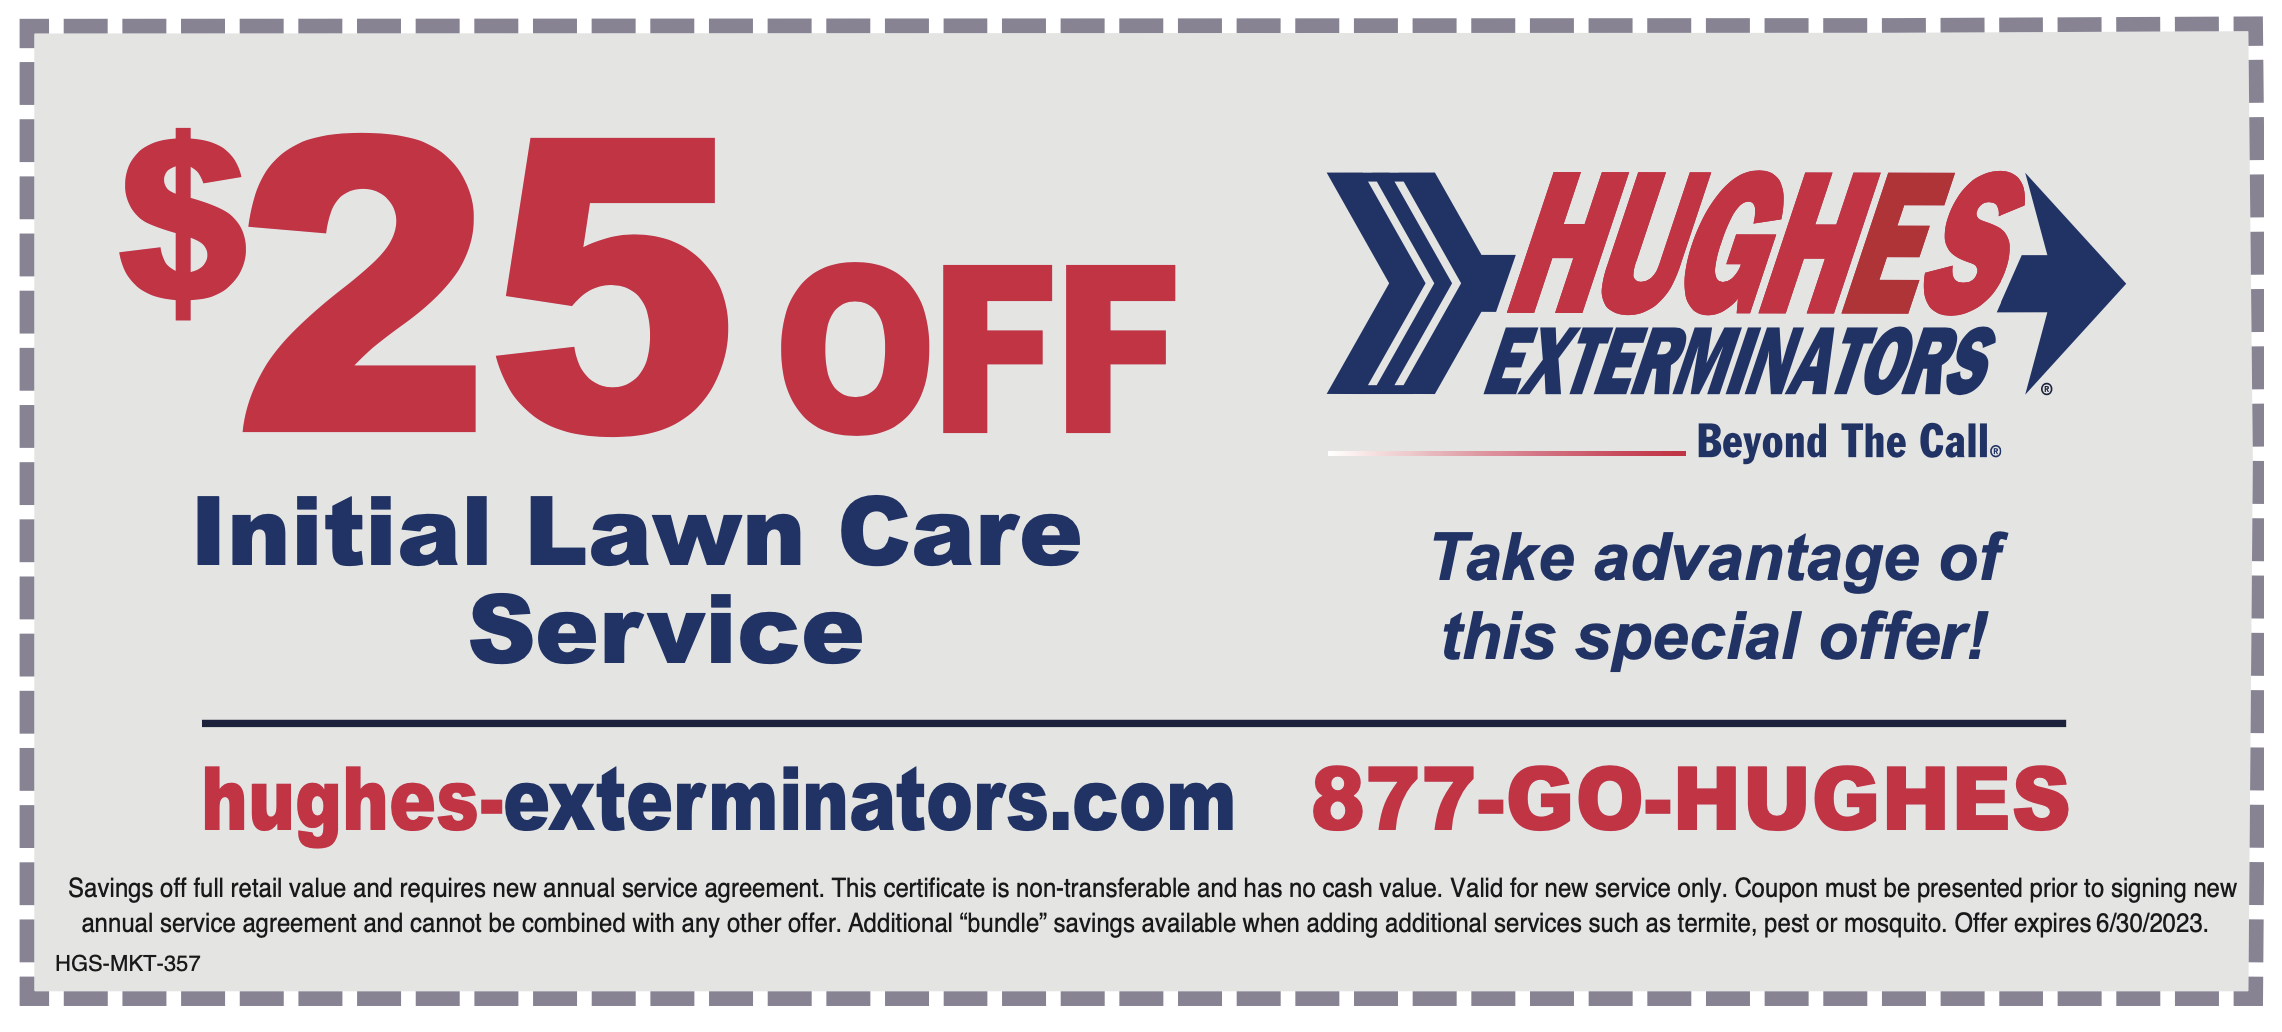 hughes_lawn_care_exp_2023.png